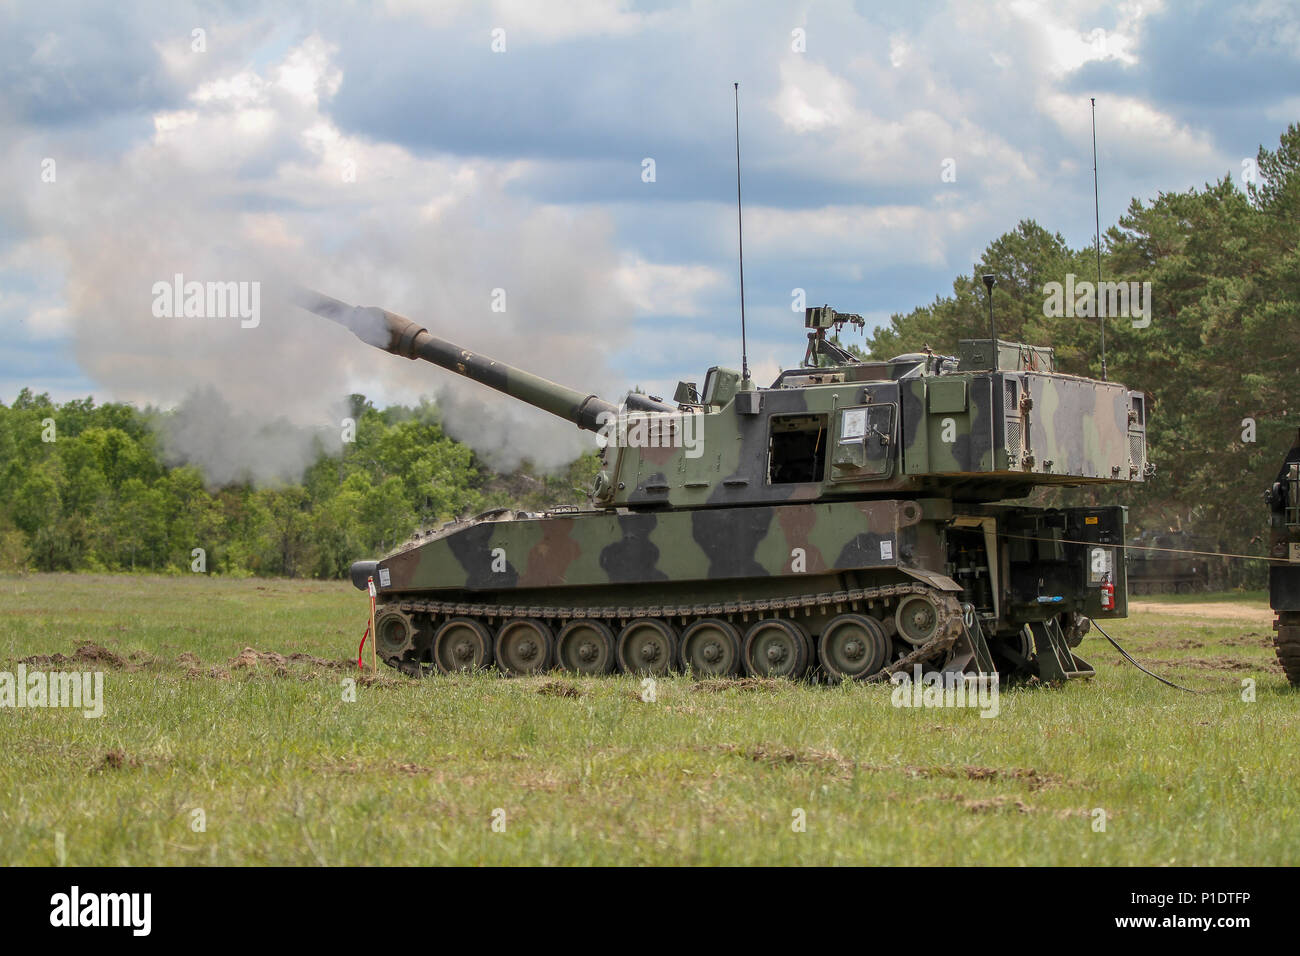 CAMP GRAYLING, Mich. – A M1908 Paladin from the 2-150 Field Artillery Regiment fires the first round of the day during a live fire exercise at Camp Grayling, Mich. June 7, 2018. As a safety precaution, pulling a 25-foot lanyard to ensure the safety of the crew fires the first round from the howitzer. Stock Photo